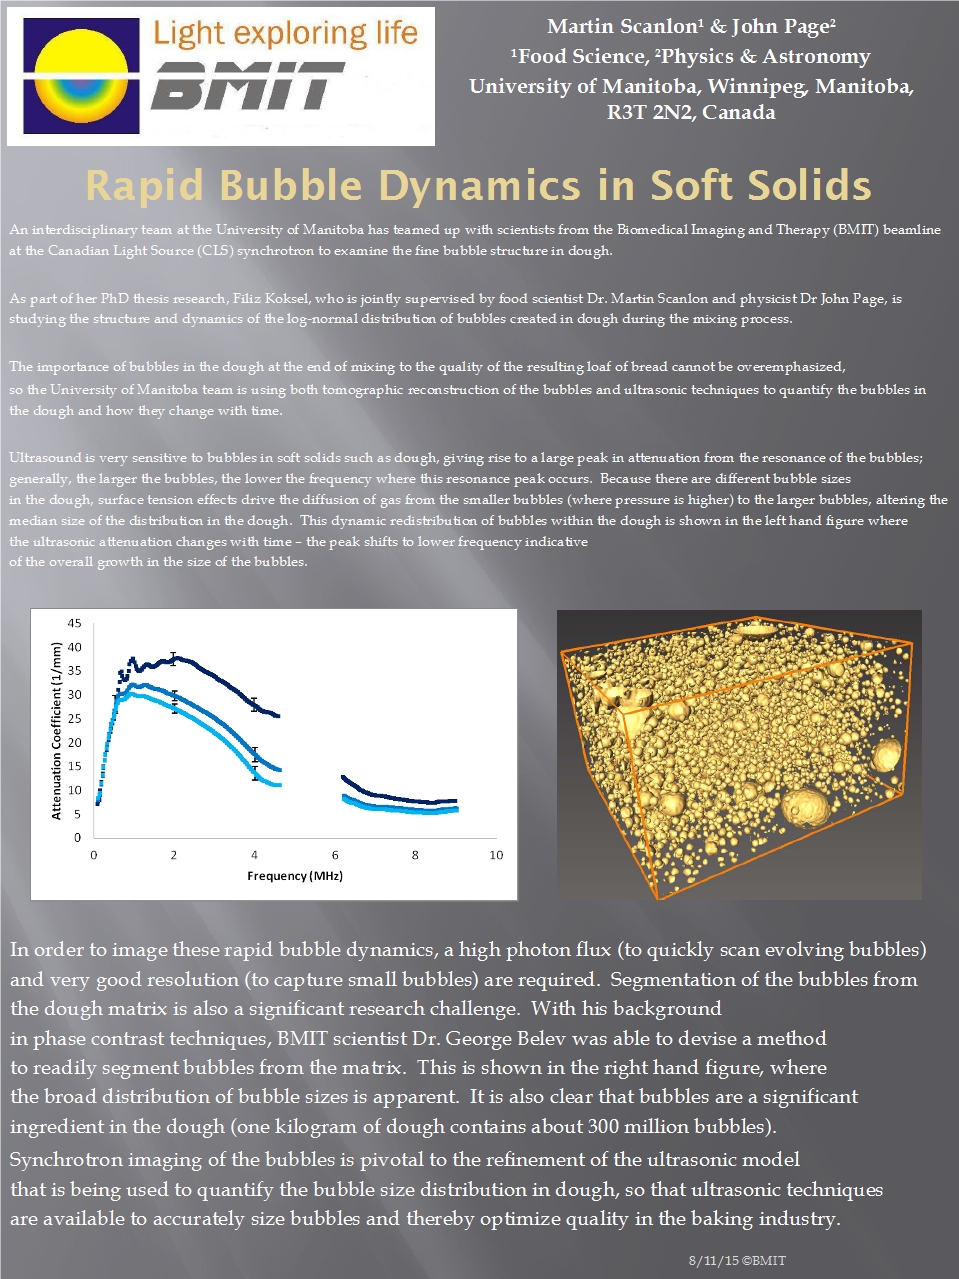 Rapid Bubble Dynamics in Soft Solids  Image